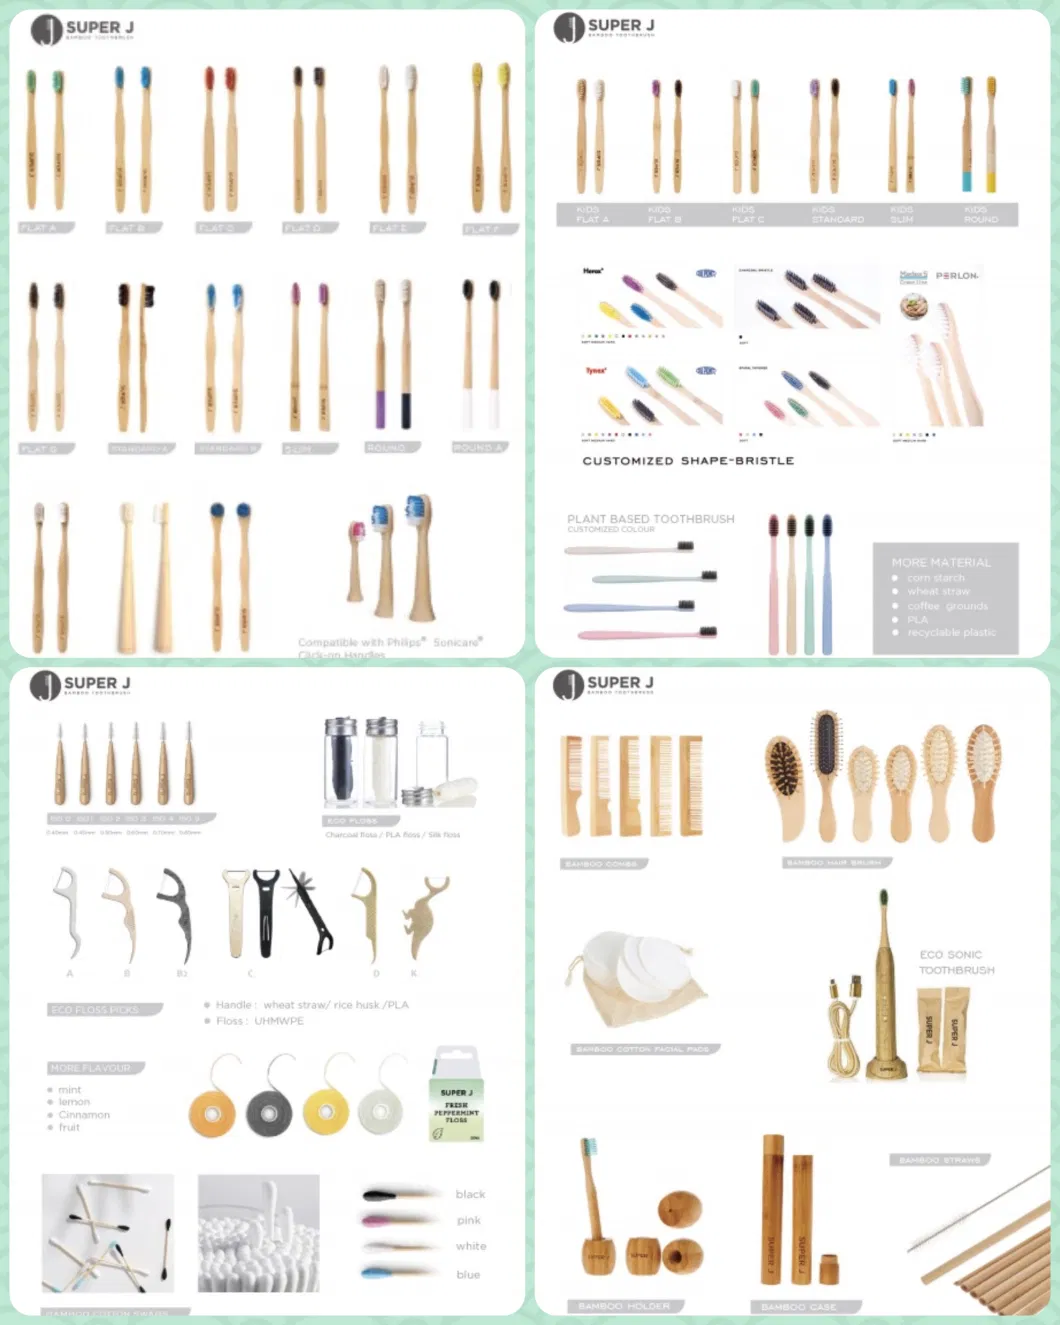 BPA Free Nylon Bristles 100% Biodegradable Natural Soft Bristle Wood Eco-Friendly Bamboo Toothbrush for Home Hotel Travel Use